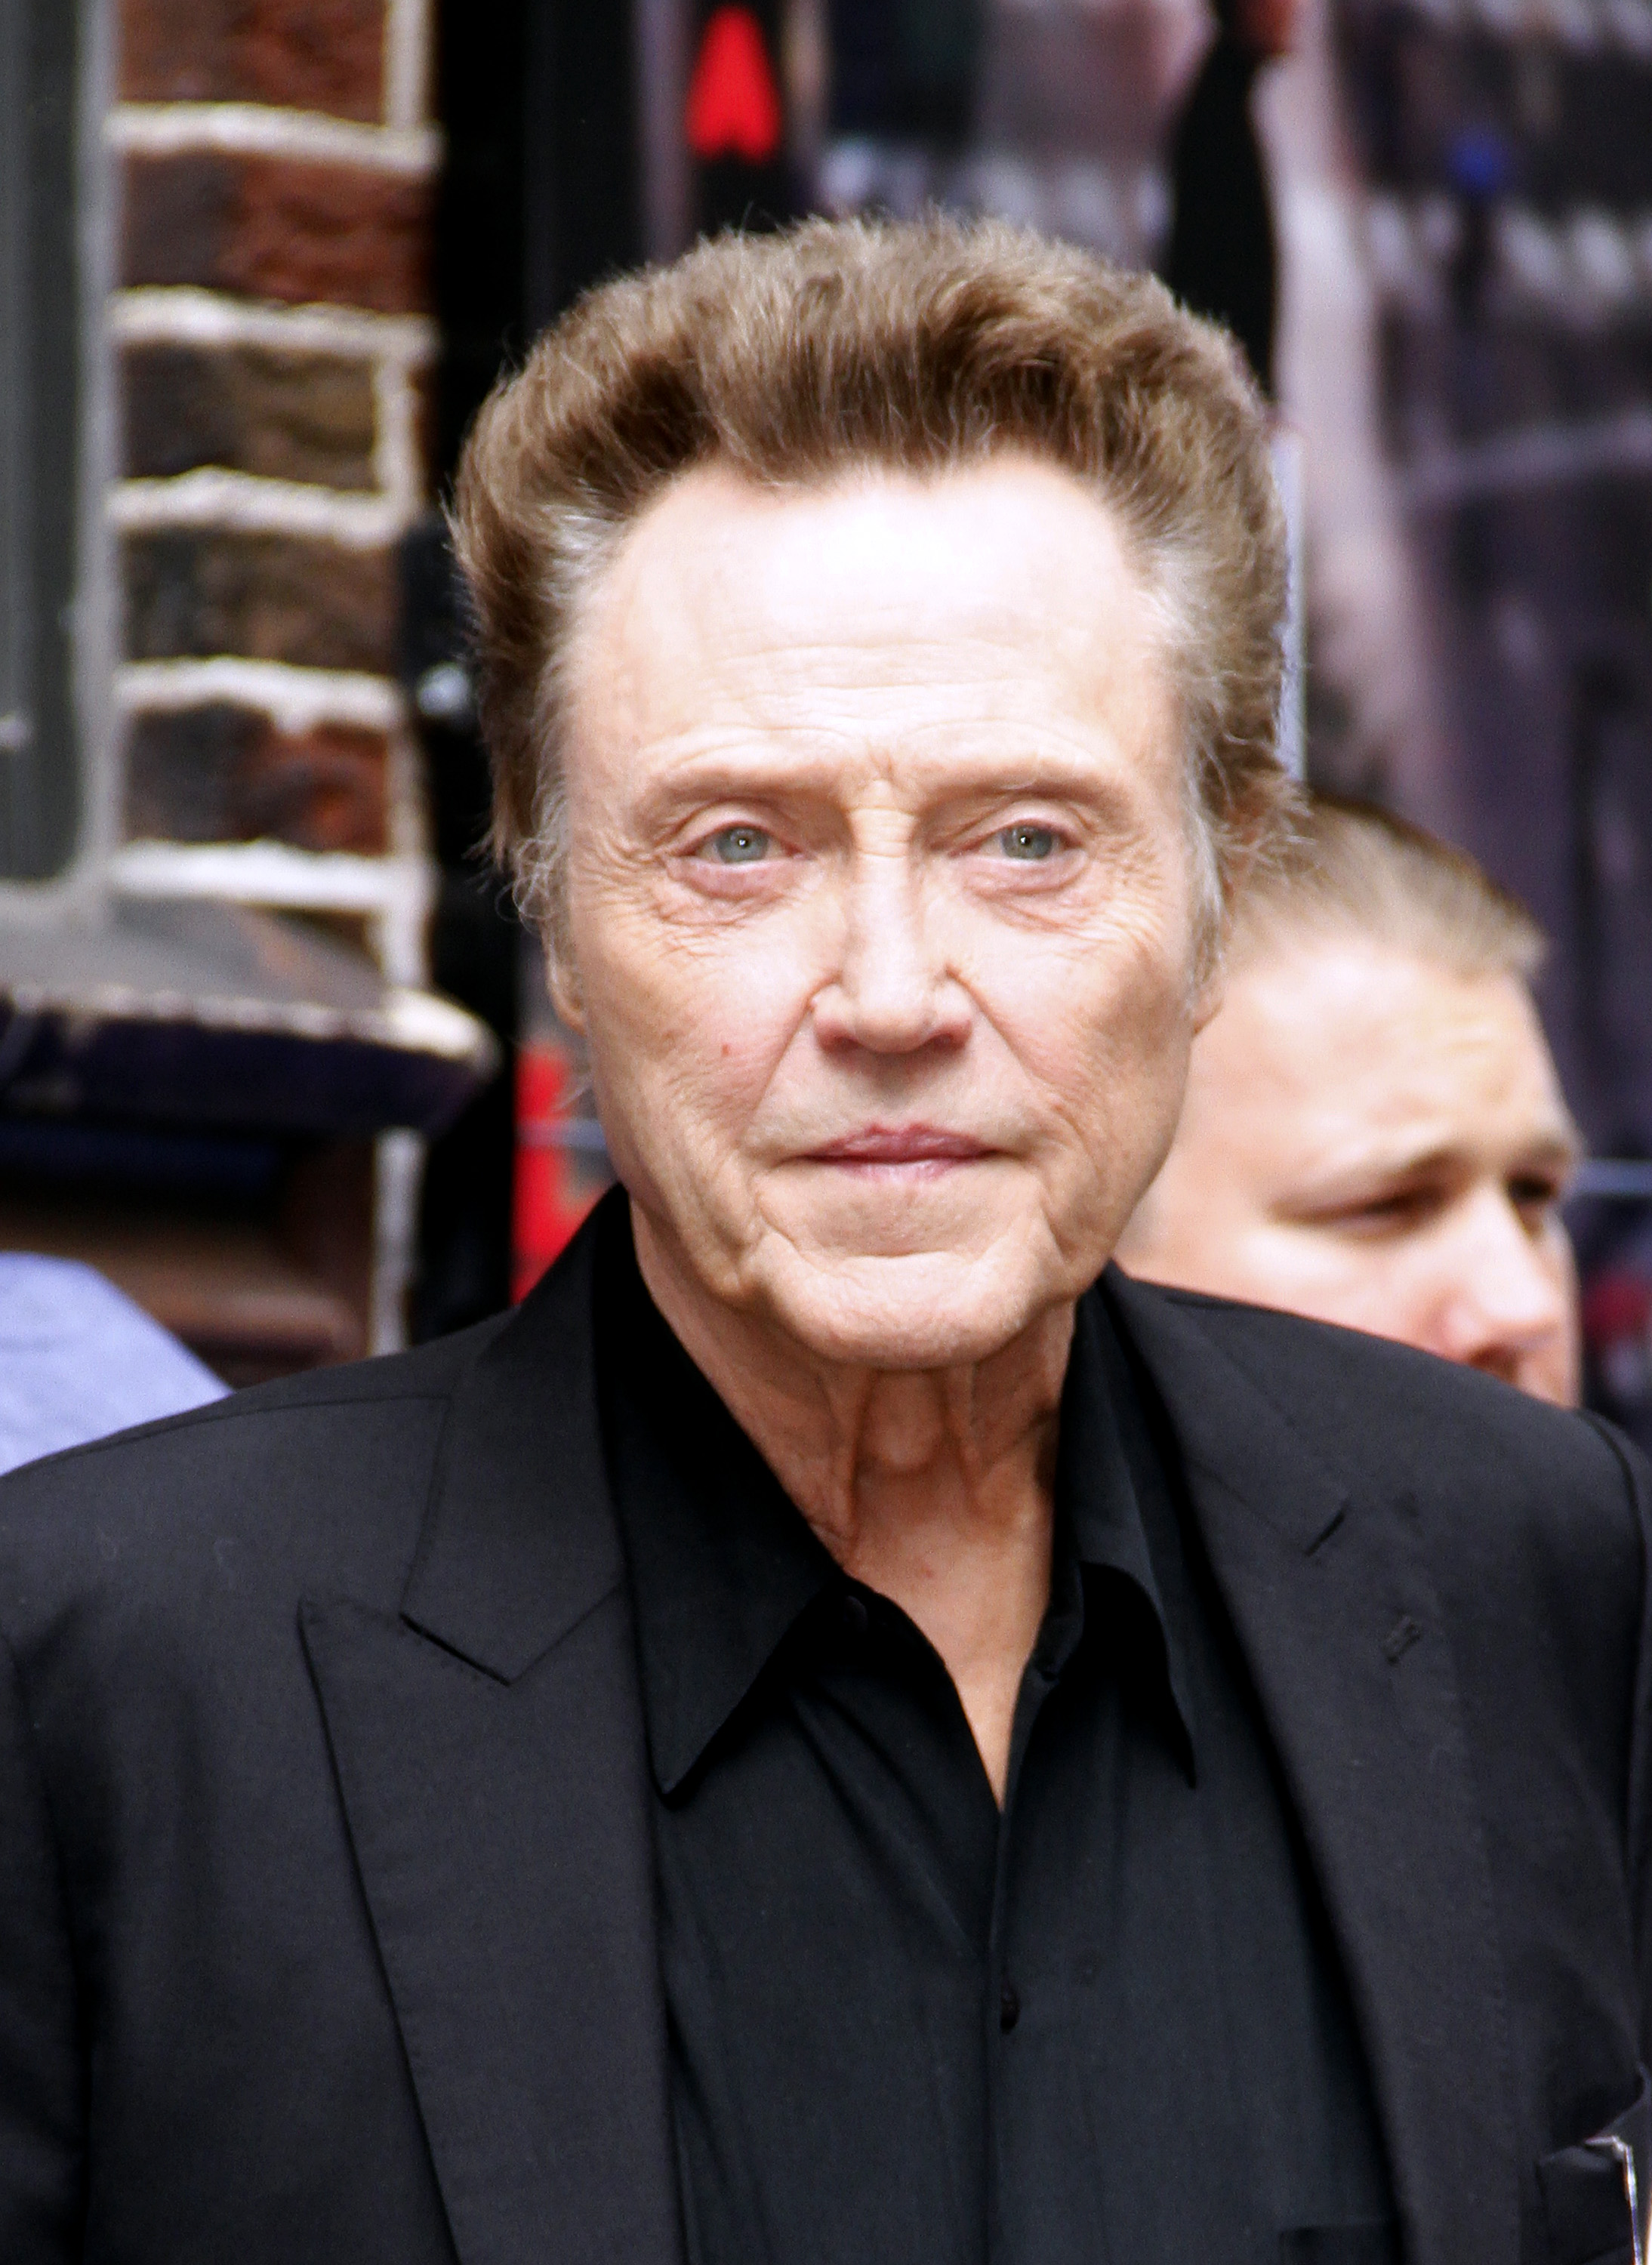 Christopher Walken leaves the "Late Show with David Letterman" at Ed Sullivan Theater on June 11, 2014 in New York City.